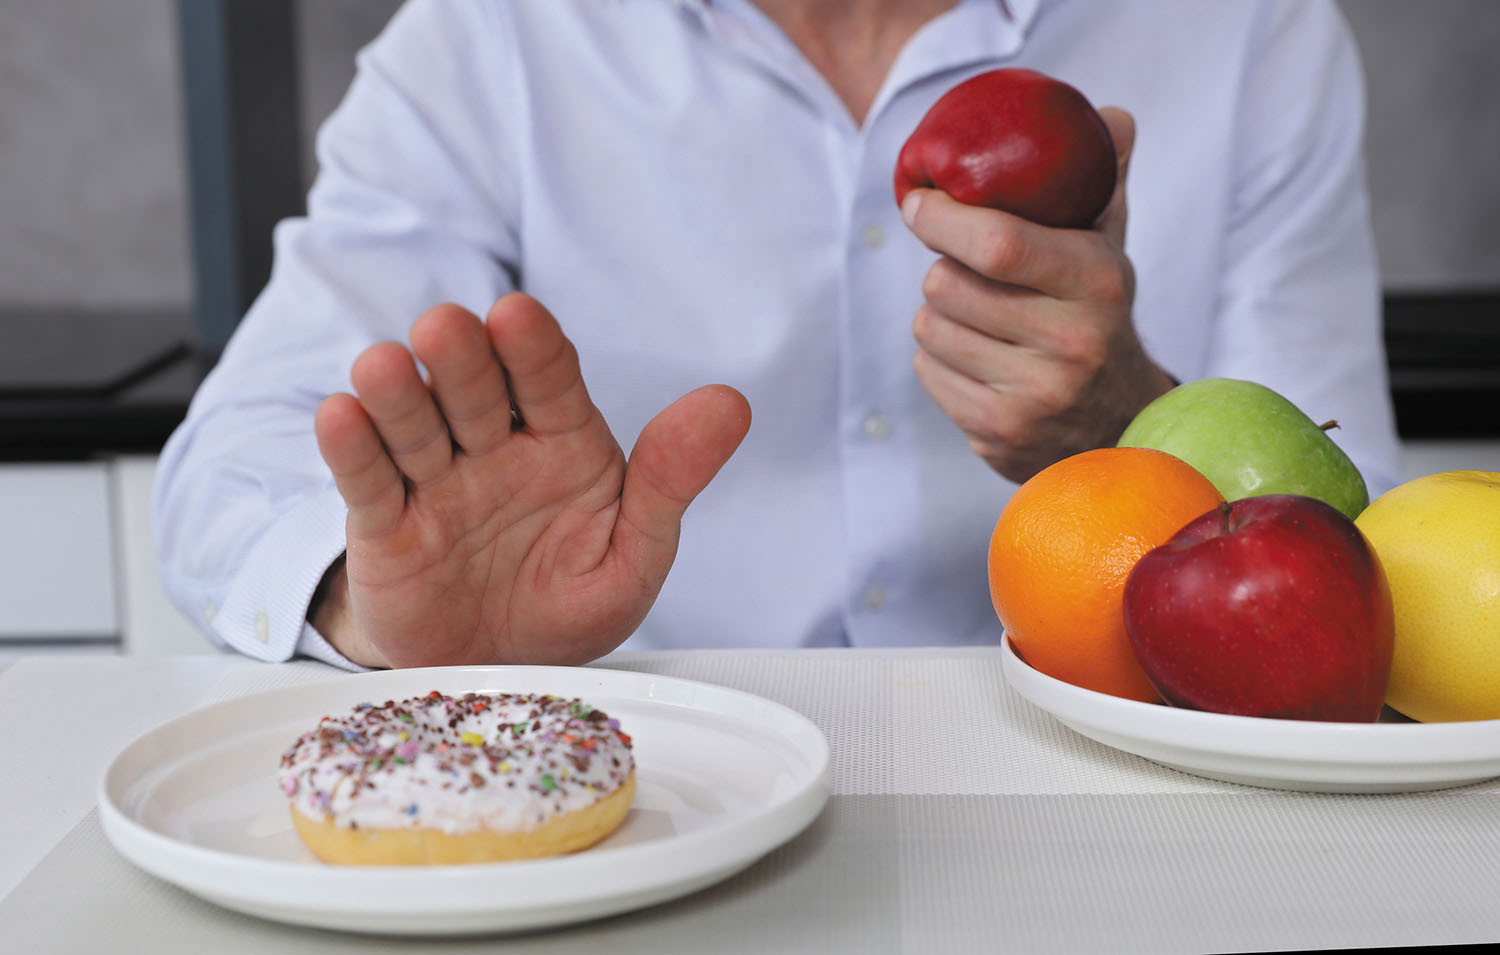 cropped photo showing the hands and torso of a man refusing a doughnut and choosing an apple from a bowl of assorted fruit